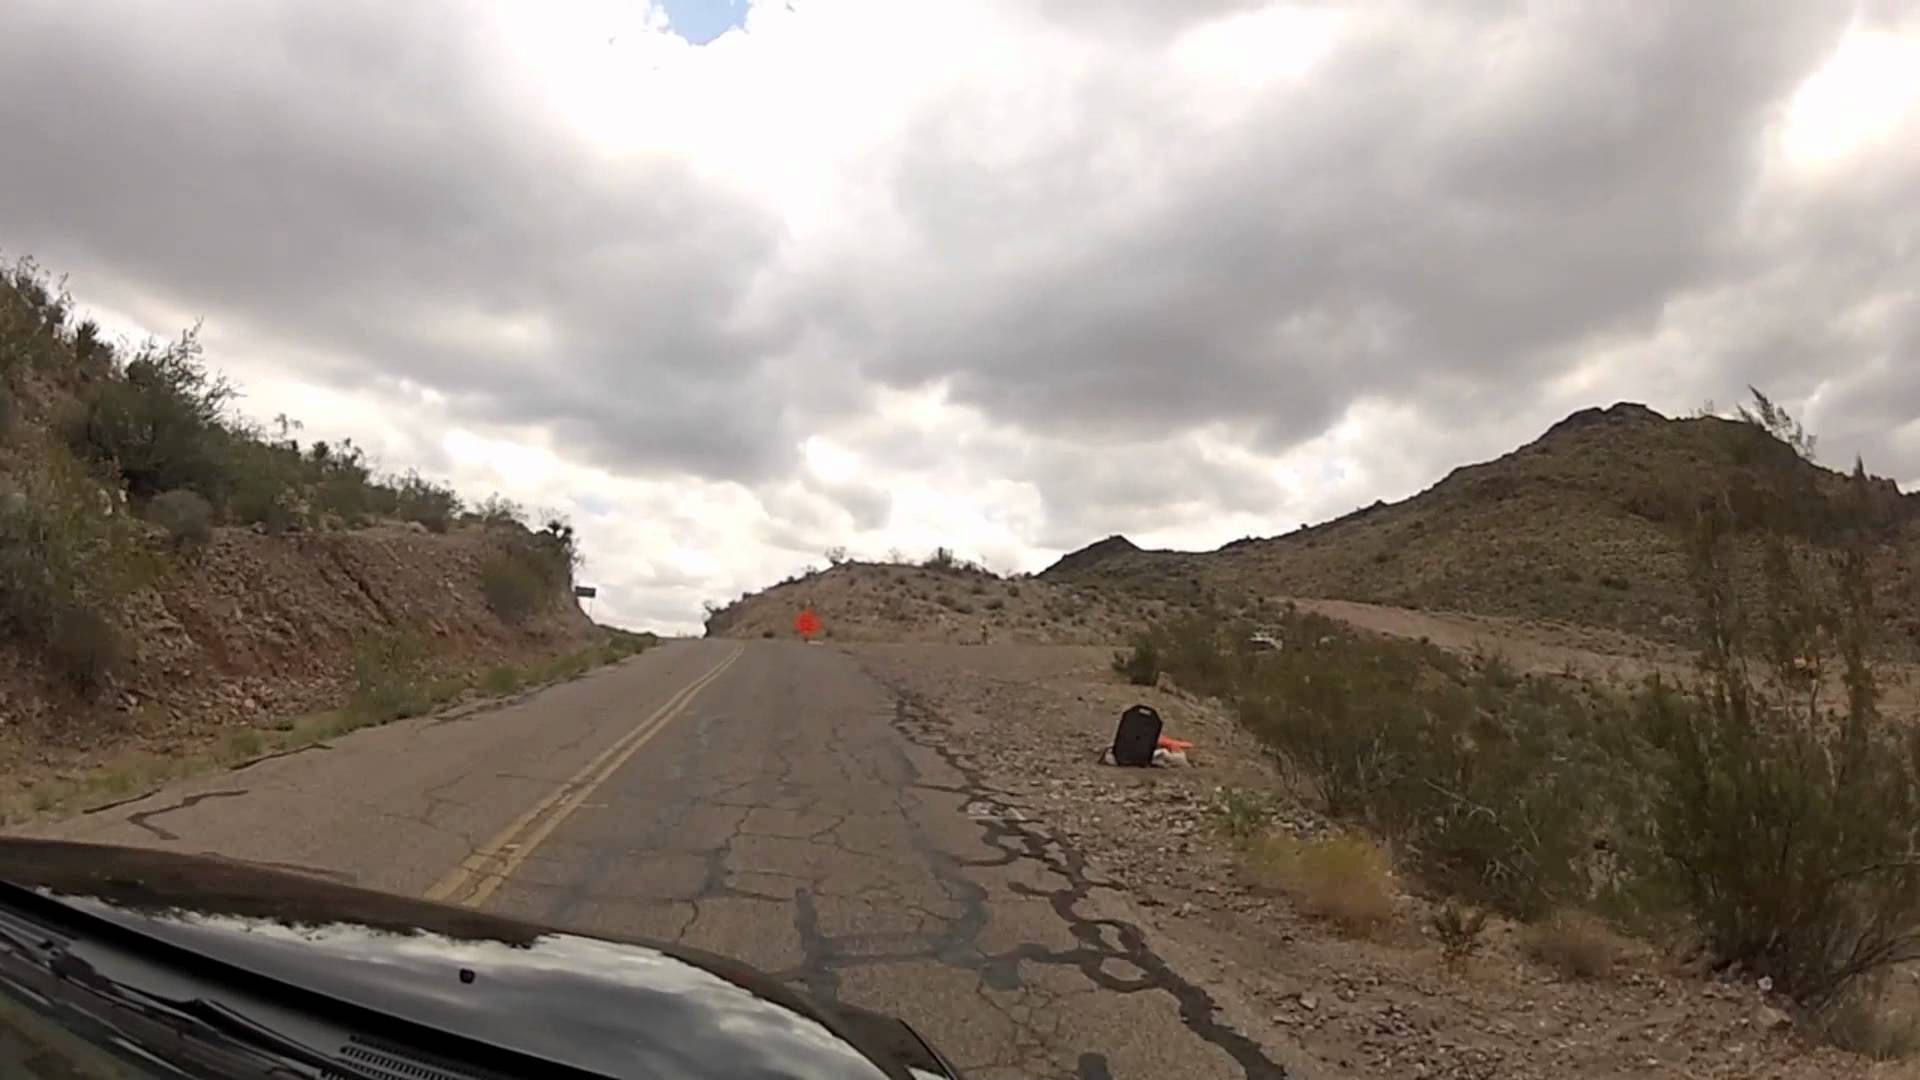 Historic Route 66 - driving from Oatman over Black Mountains - YouTube